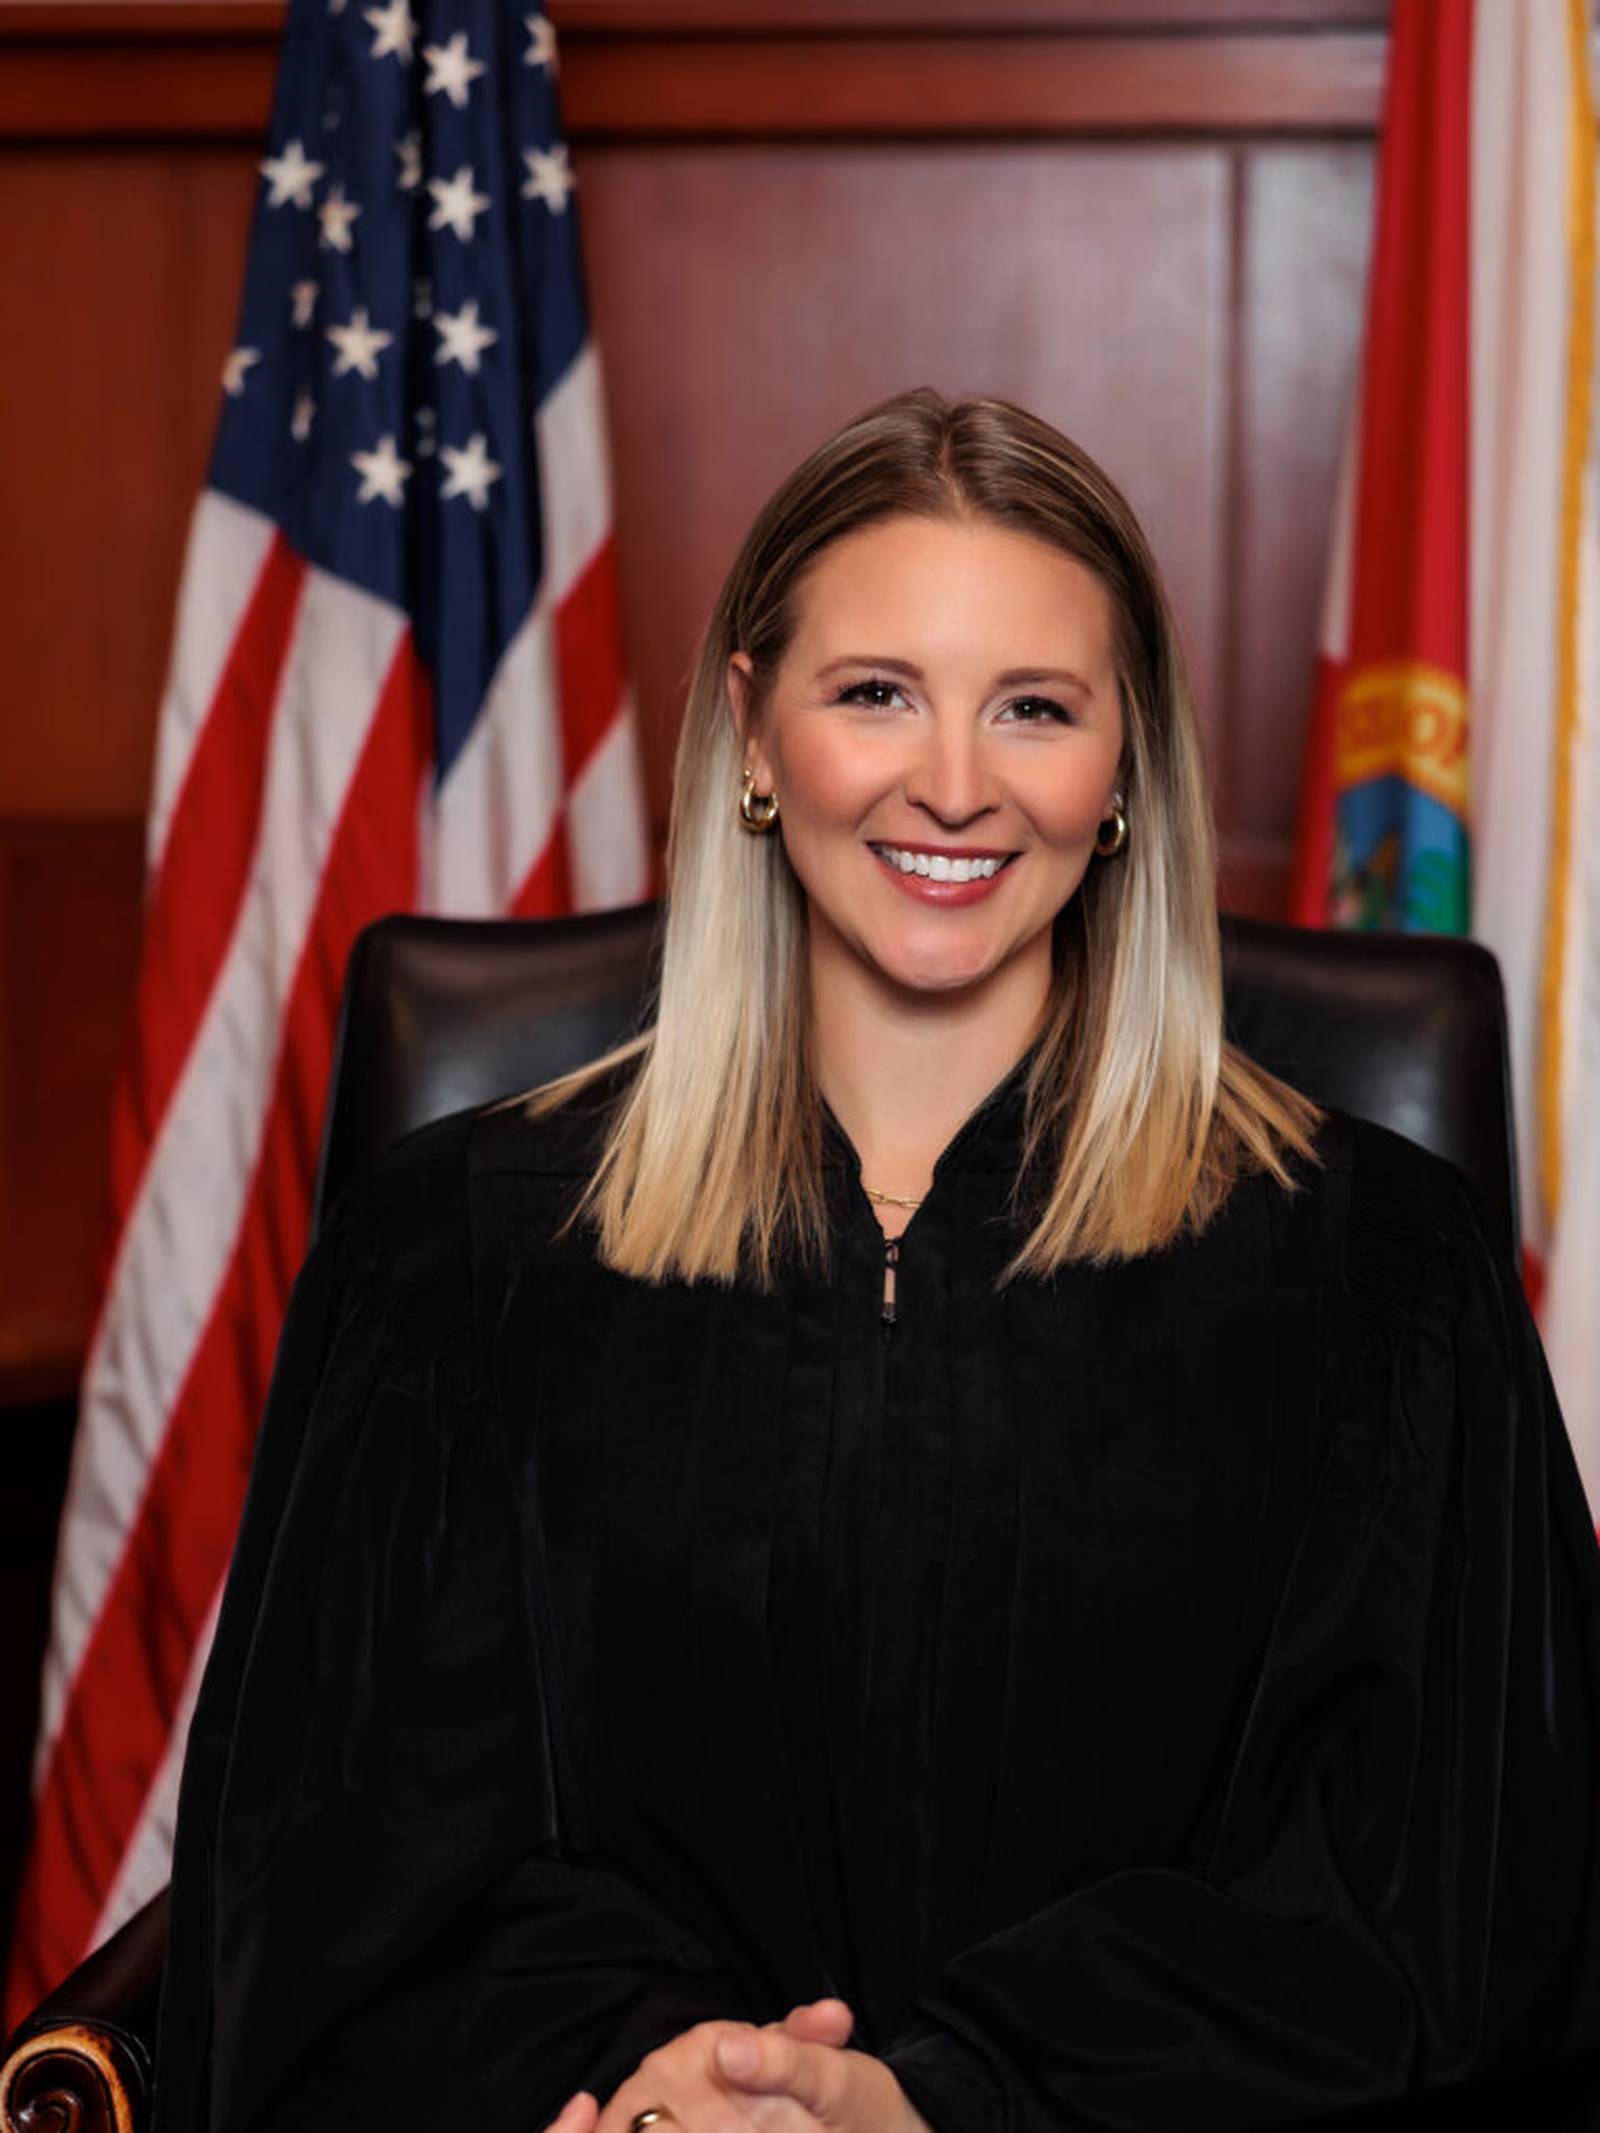 St. Johns judge Casey Woolsey could face reprimand – Action News Jax